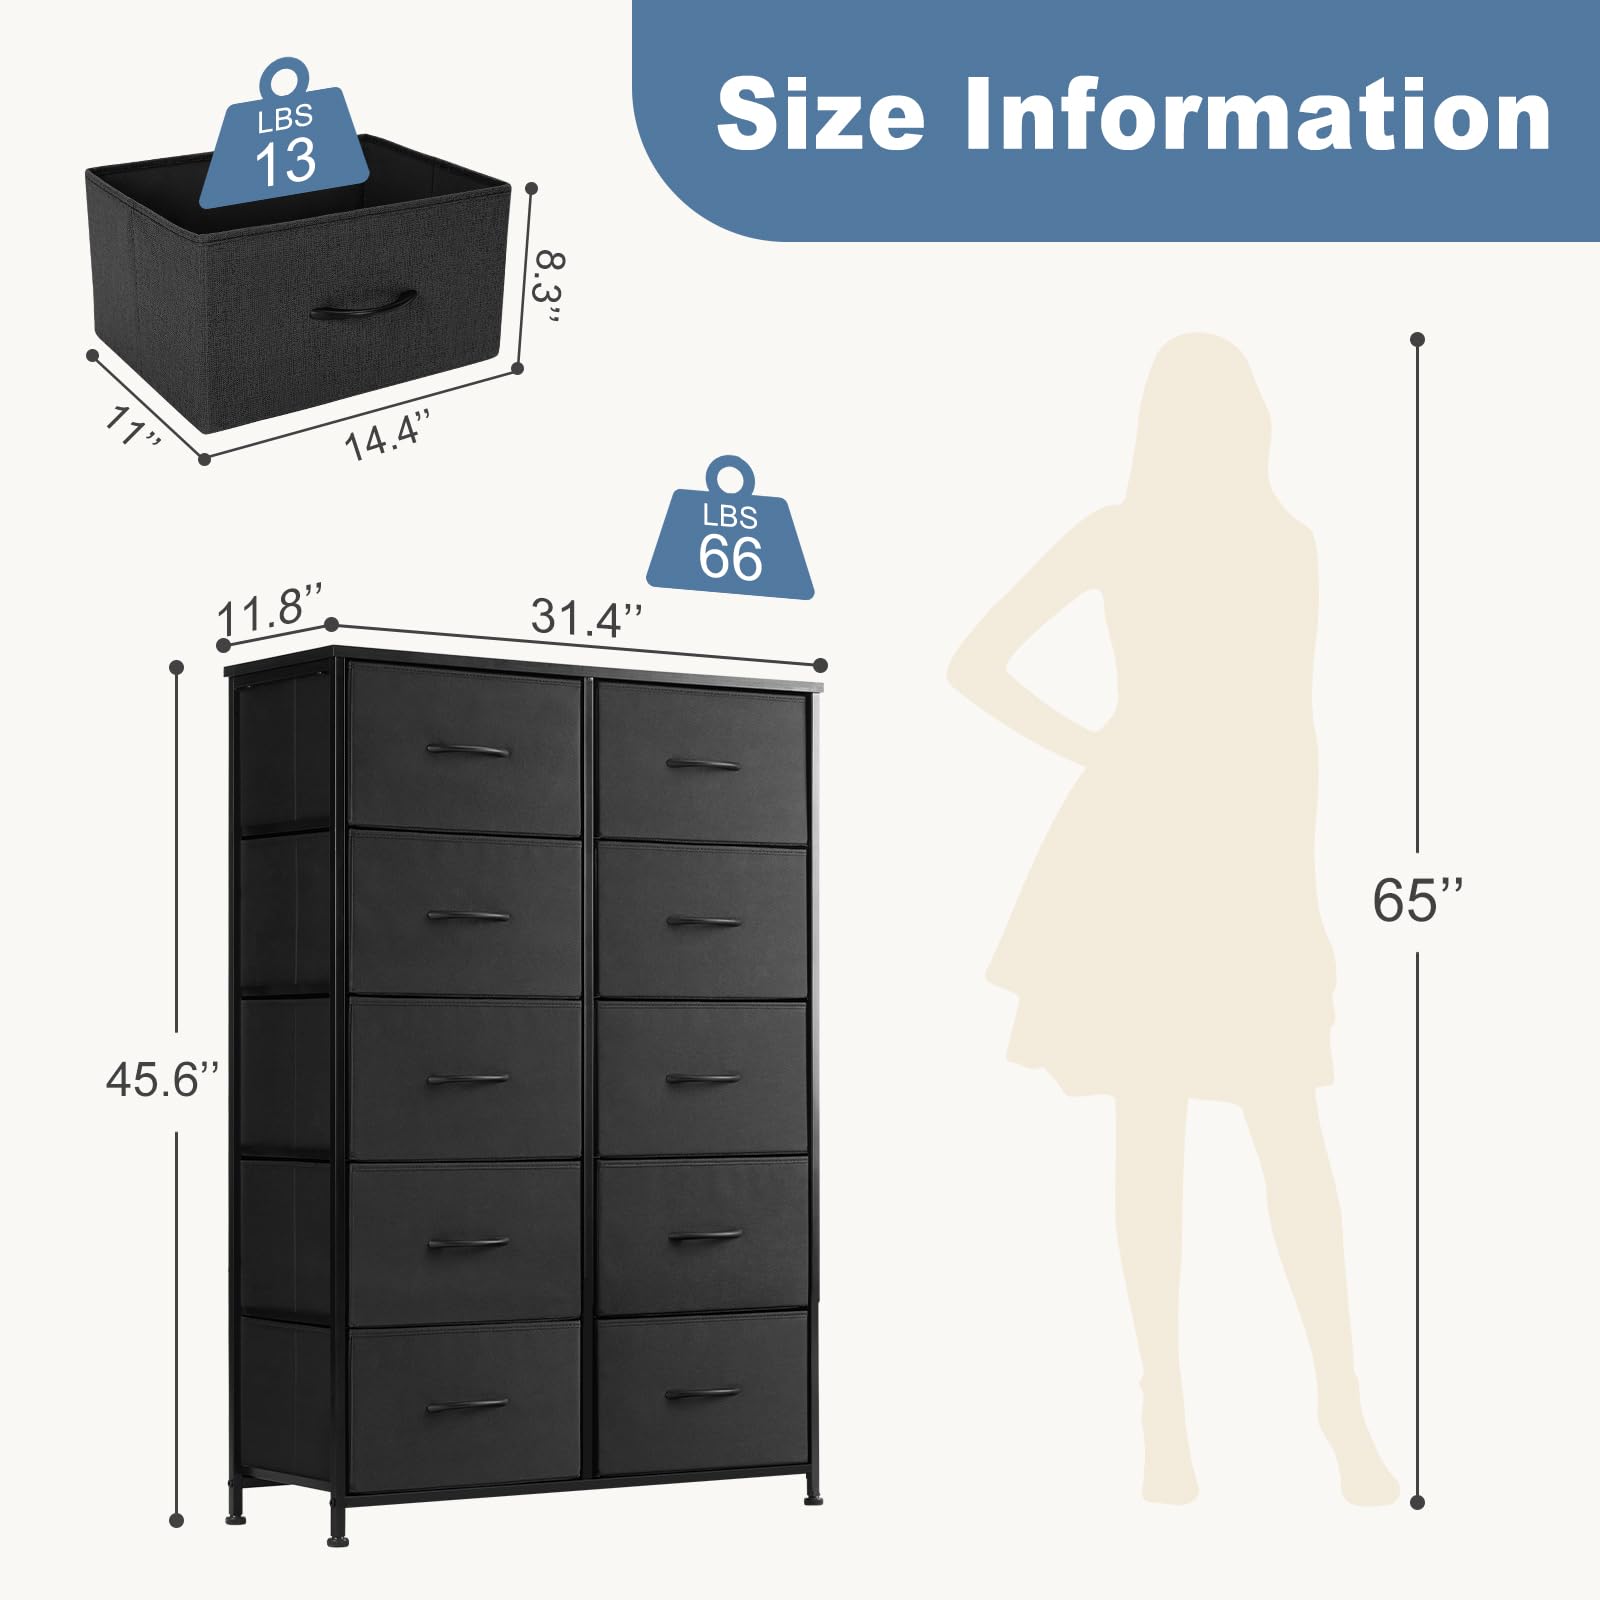 Dresser for Bedroom, Tall Storage Drawers, Fabric Storage Tower with 10 Drawers, Chest of Drawers with Fabric Bins, Sturdy Metal Frame, Wood Tabletop for Kids room, Closet, Entryway, Nursery, Black